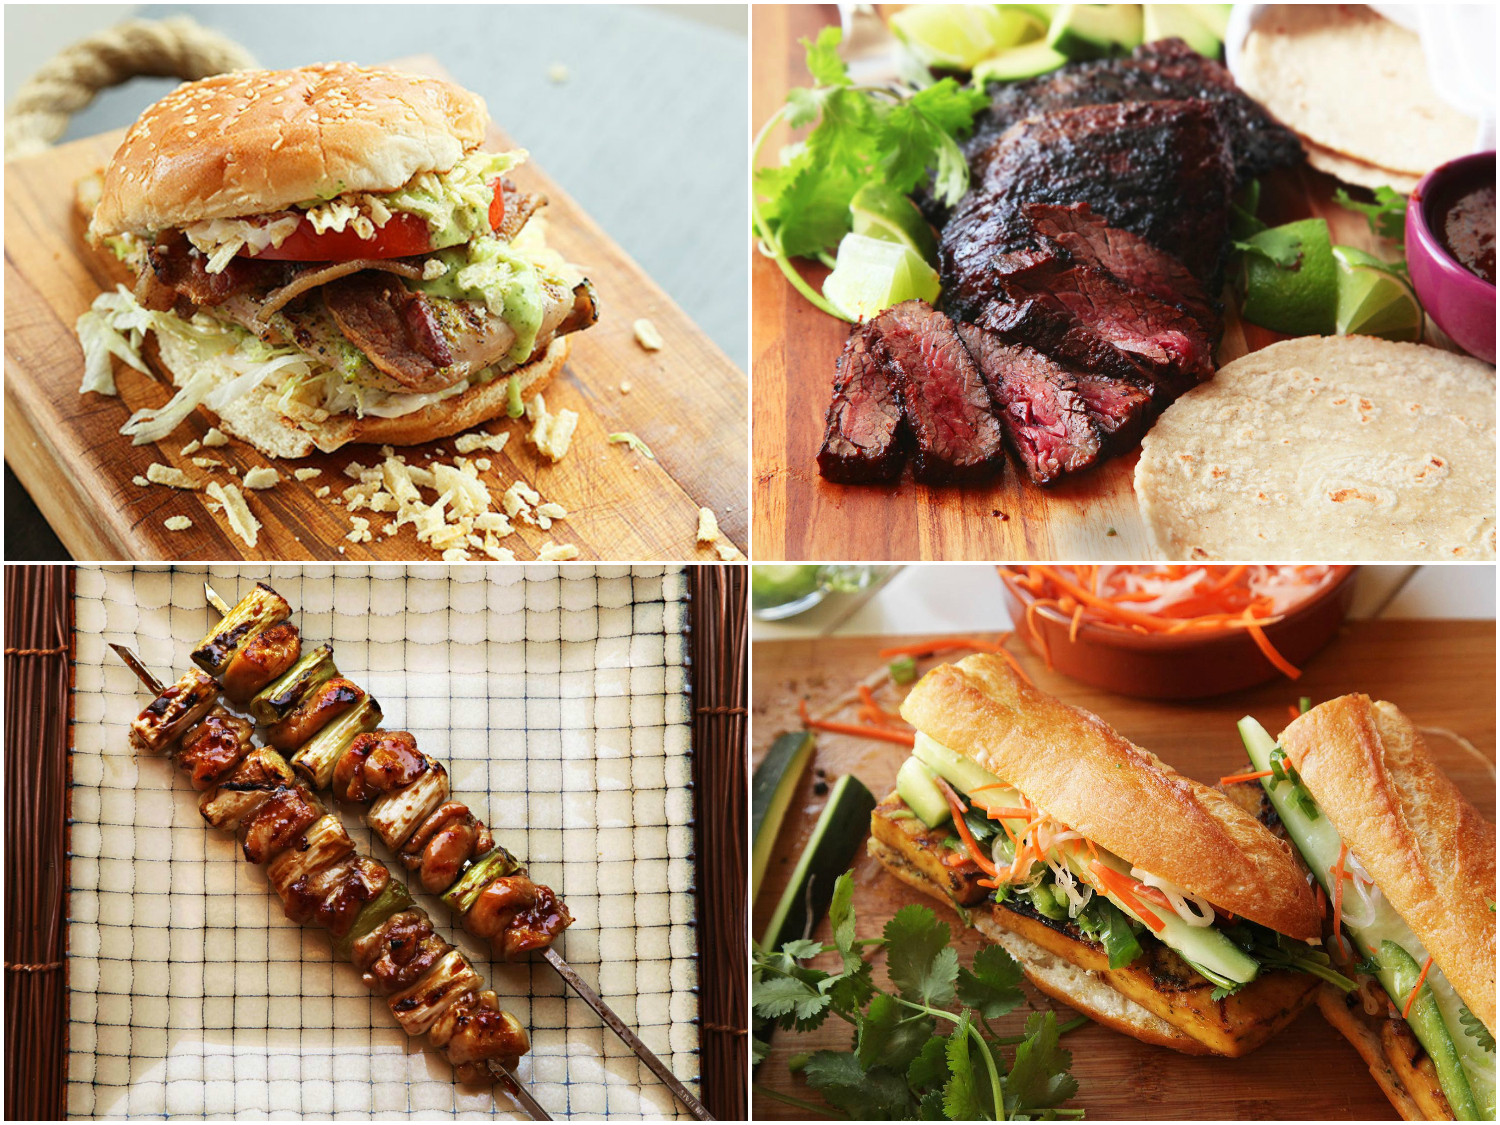 Labor Day Cookout Ideas
 35 Great Grilled Main Dishes for a Killer Labor Day